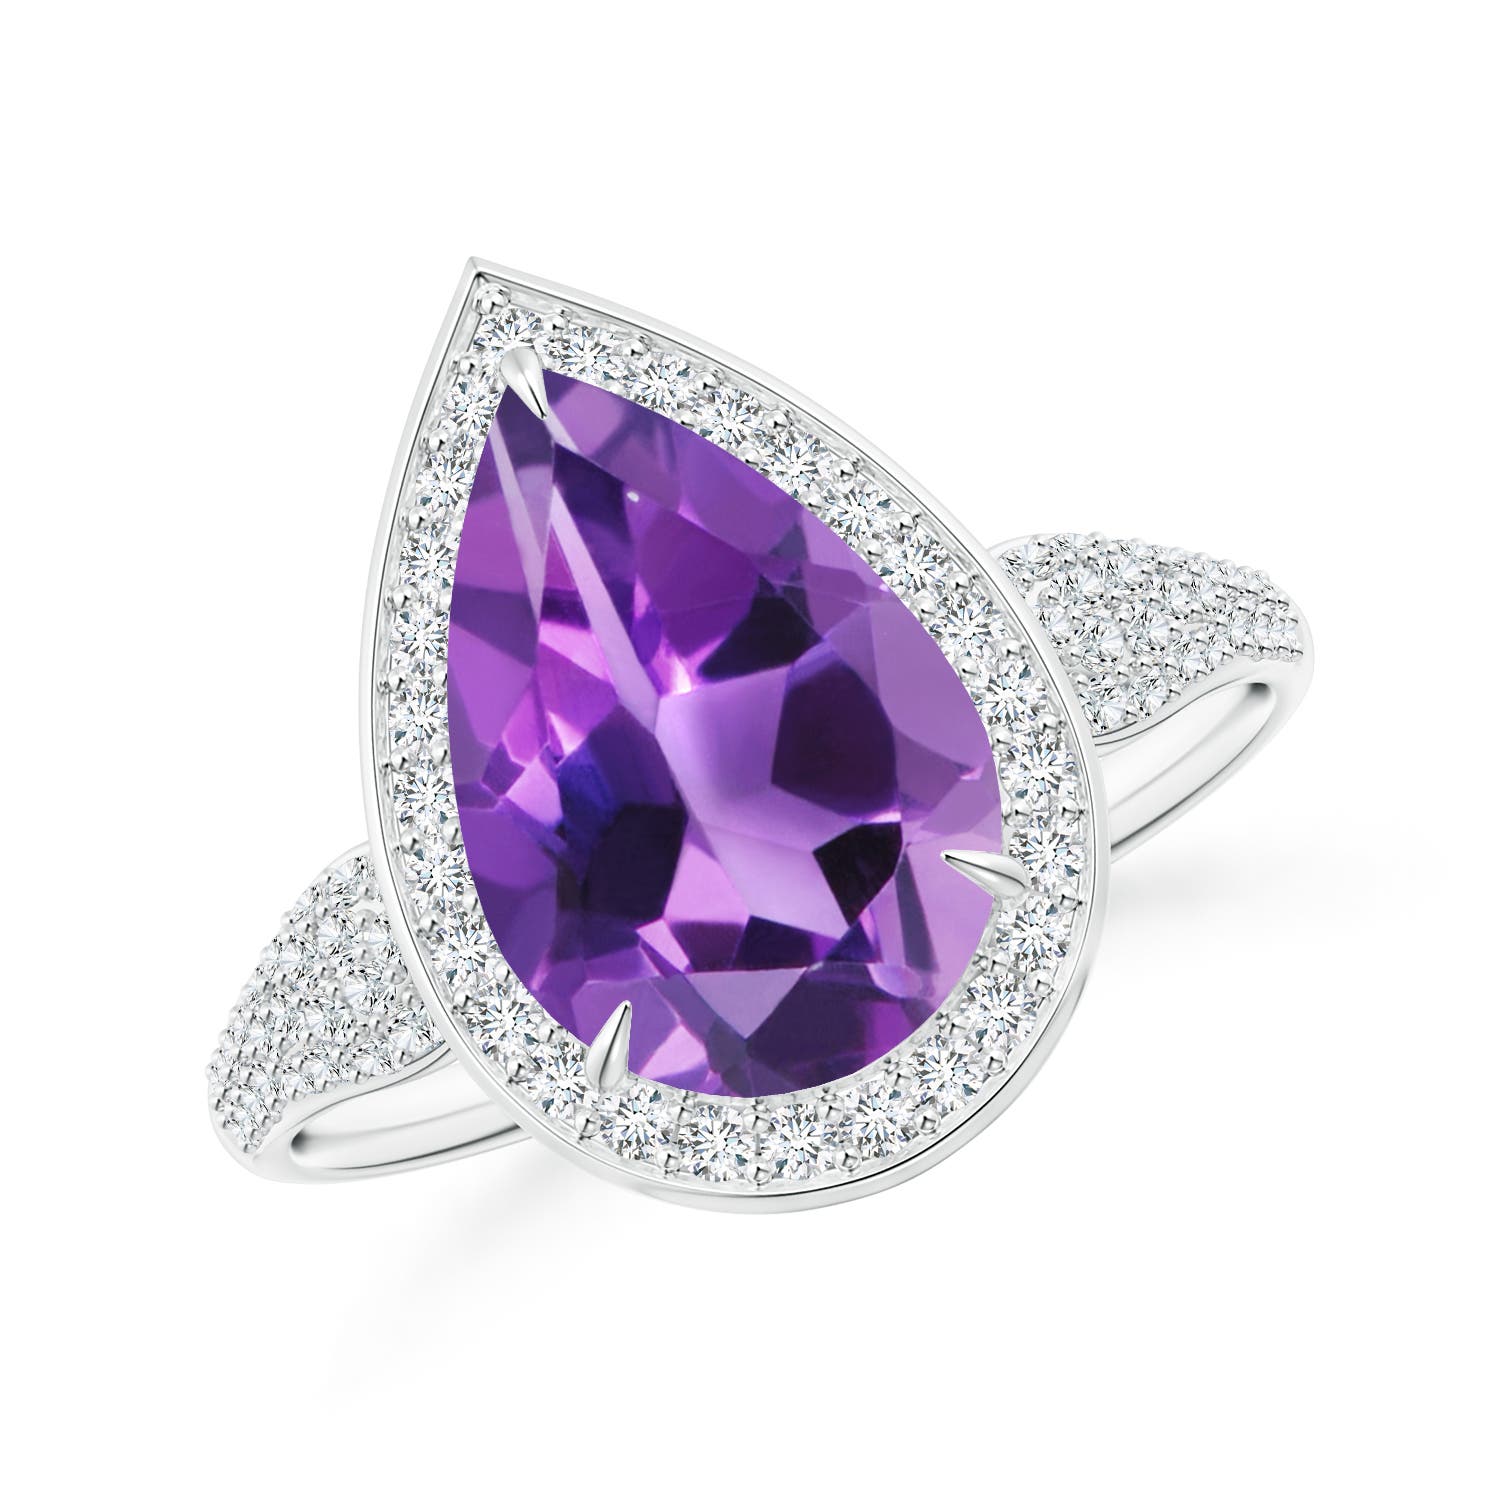 AAA - Amethyst / 3.07 CT / 14 KT White Gold